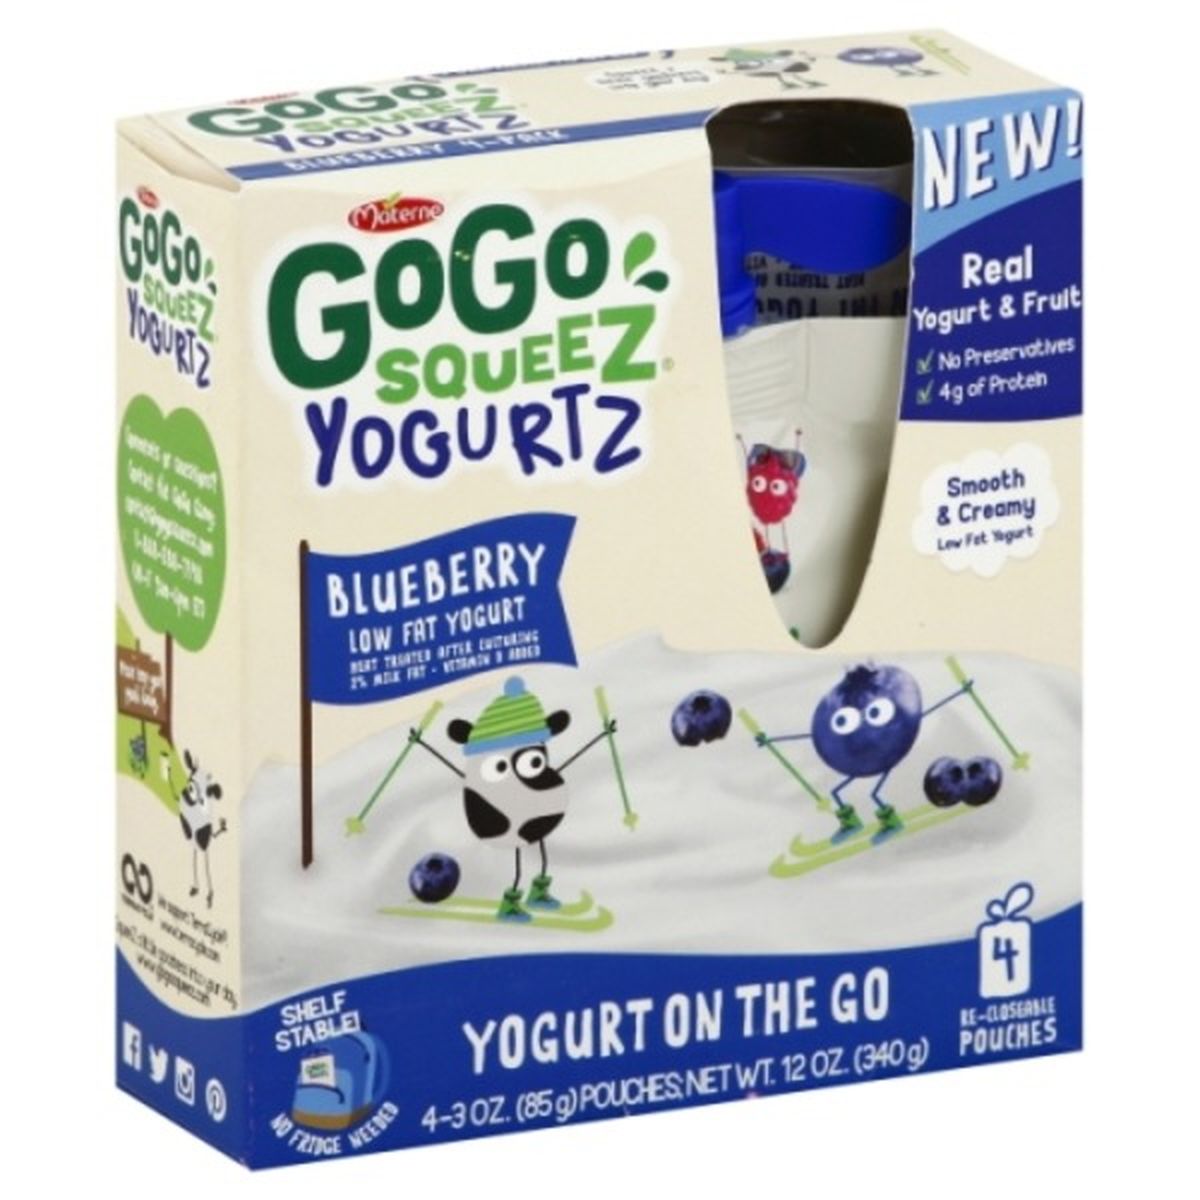 Calories in GoGo Squeez Yogurt, On the Go, Low Fat, Blueberry